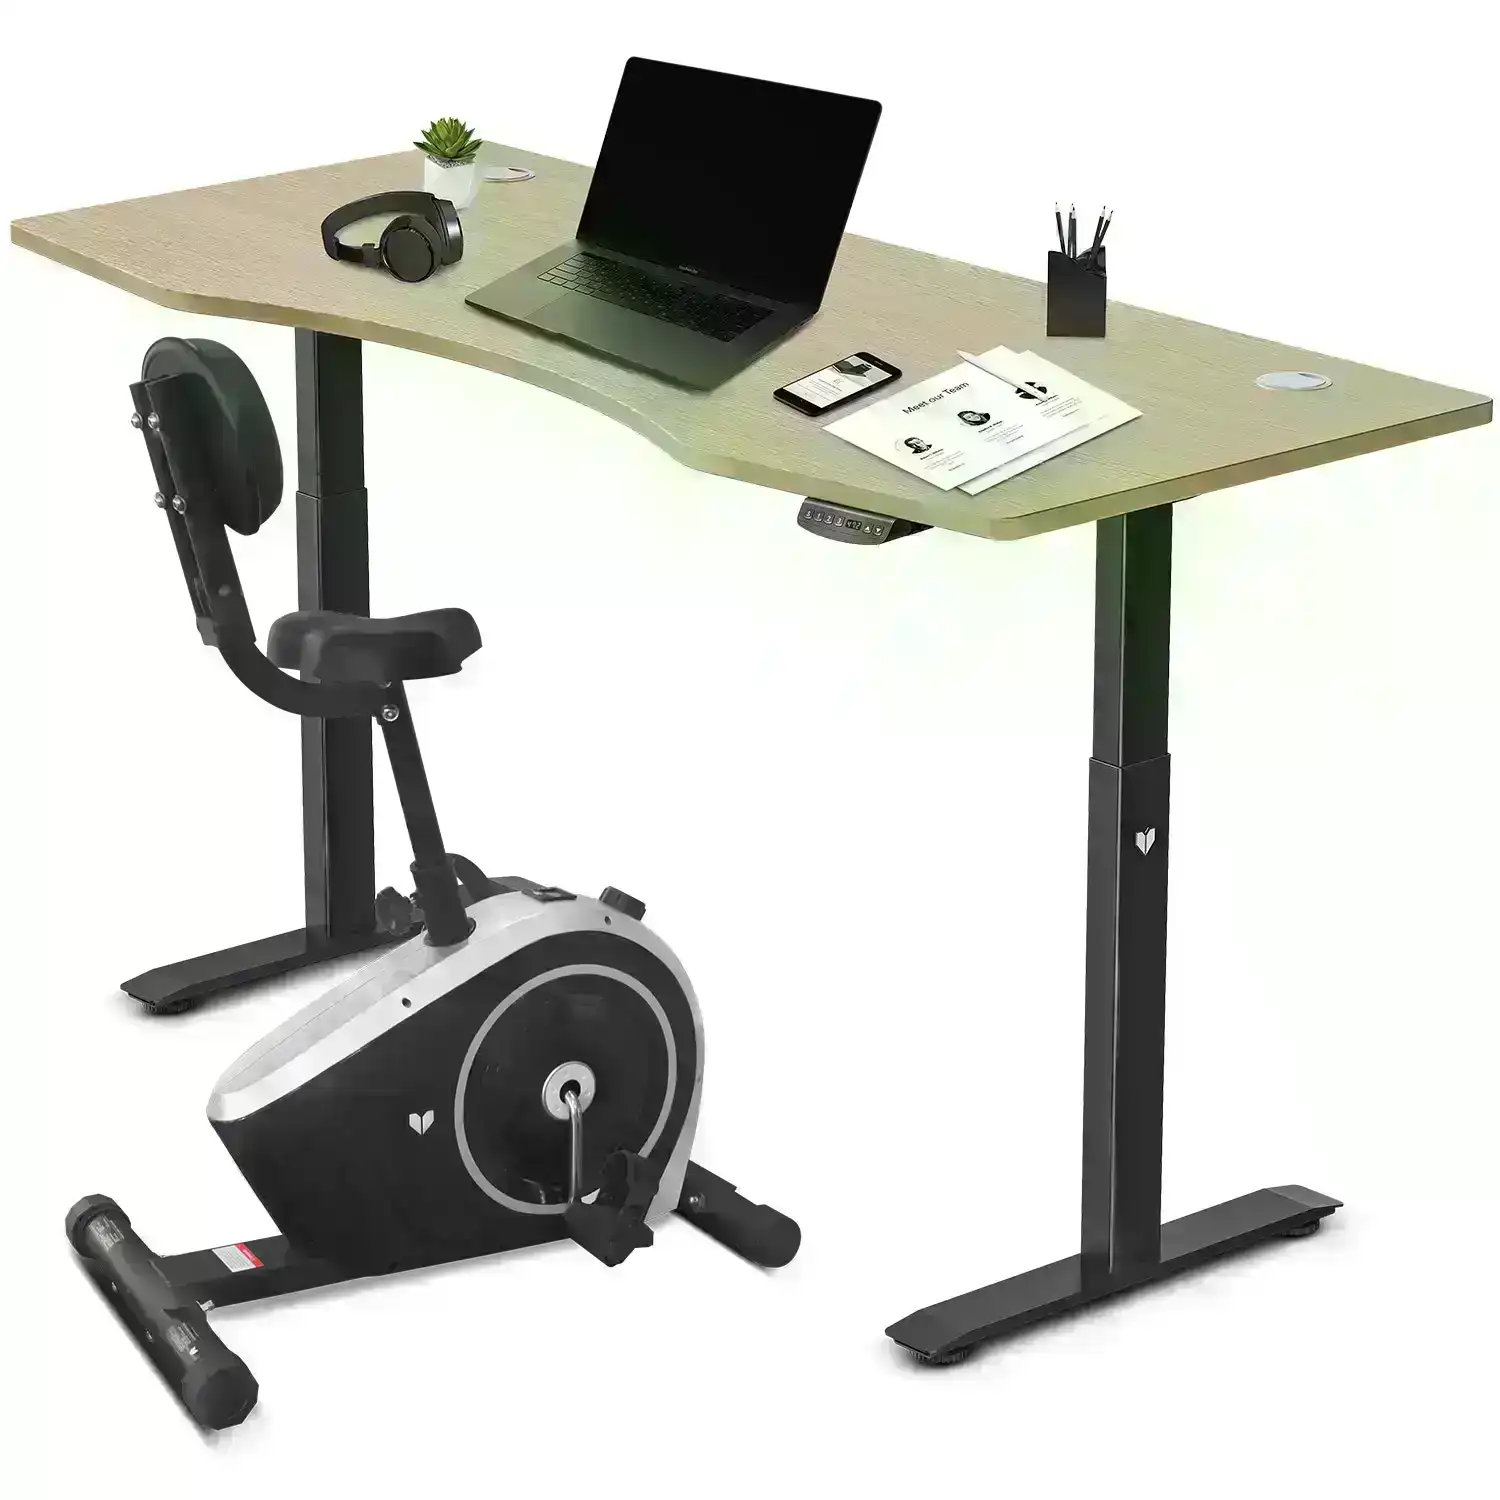 Lifespan Fitness Cyclestation3 Exercise Bike with ErgoDesk Automatic Standing Desk 1800mm in Oak